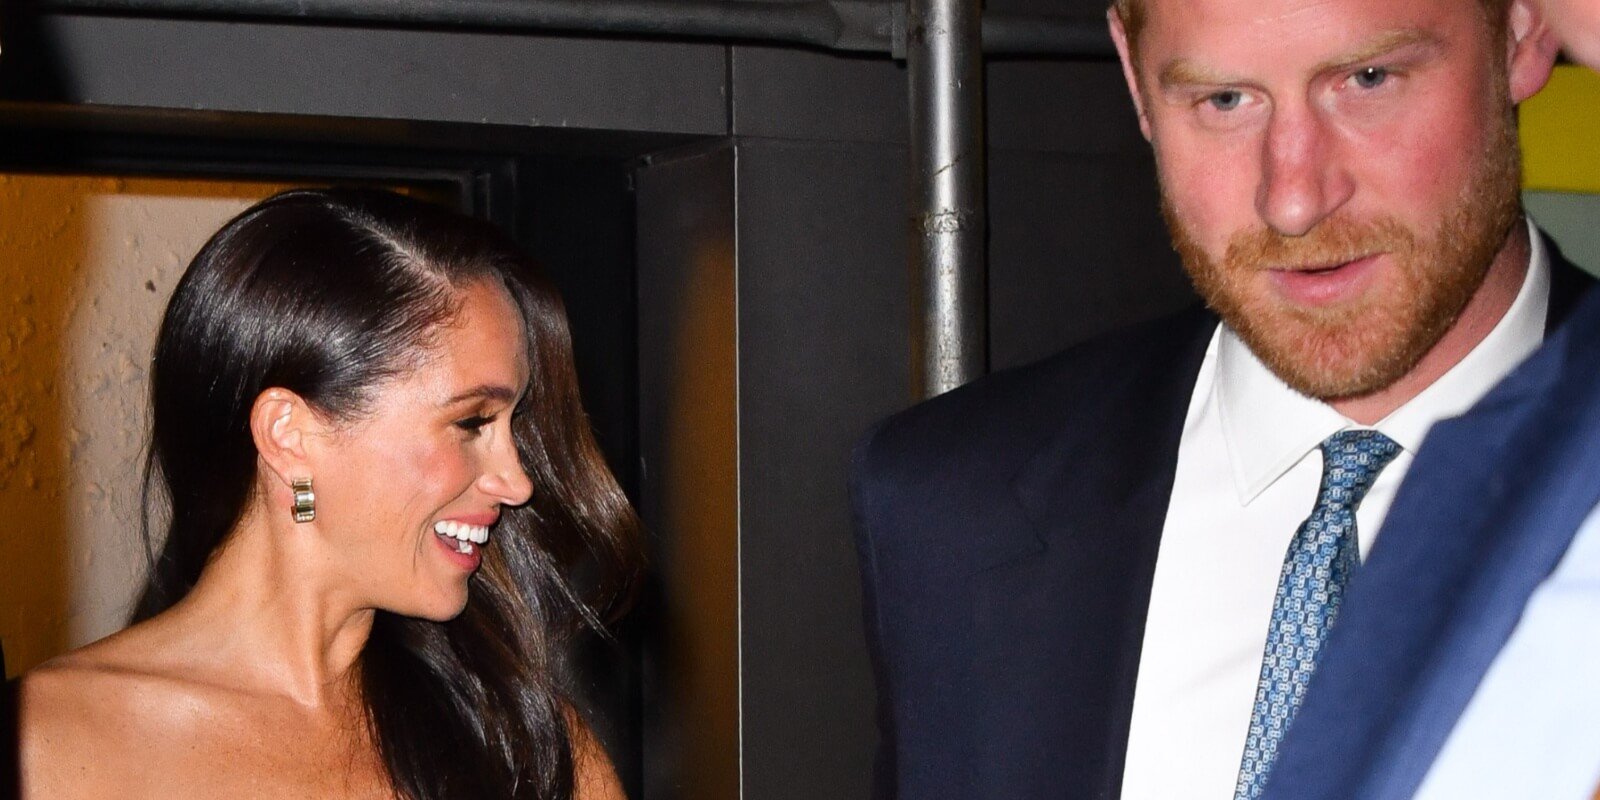 Meghan Markle and Prince Harry are photographed by paparazzi in New York City in May 2023.